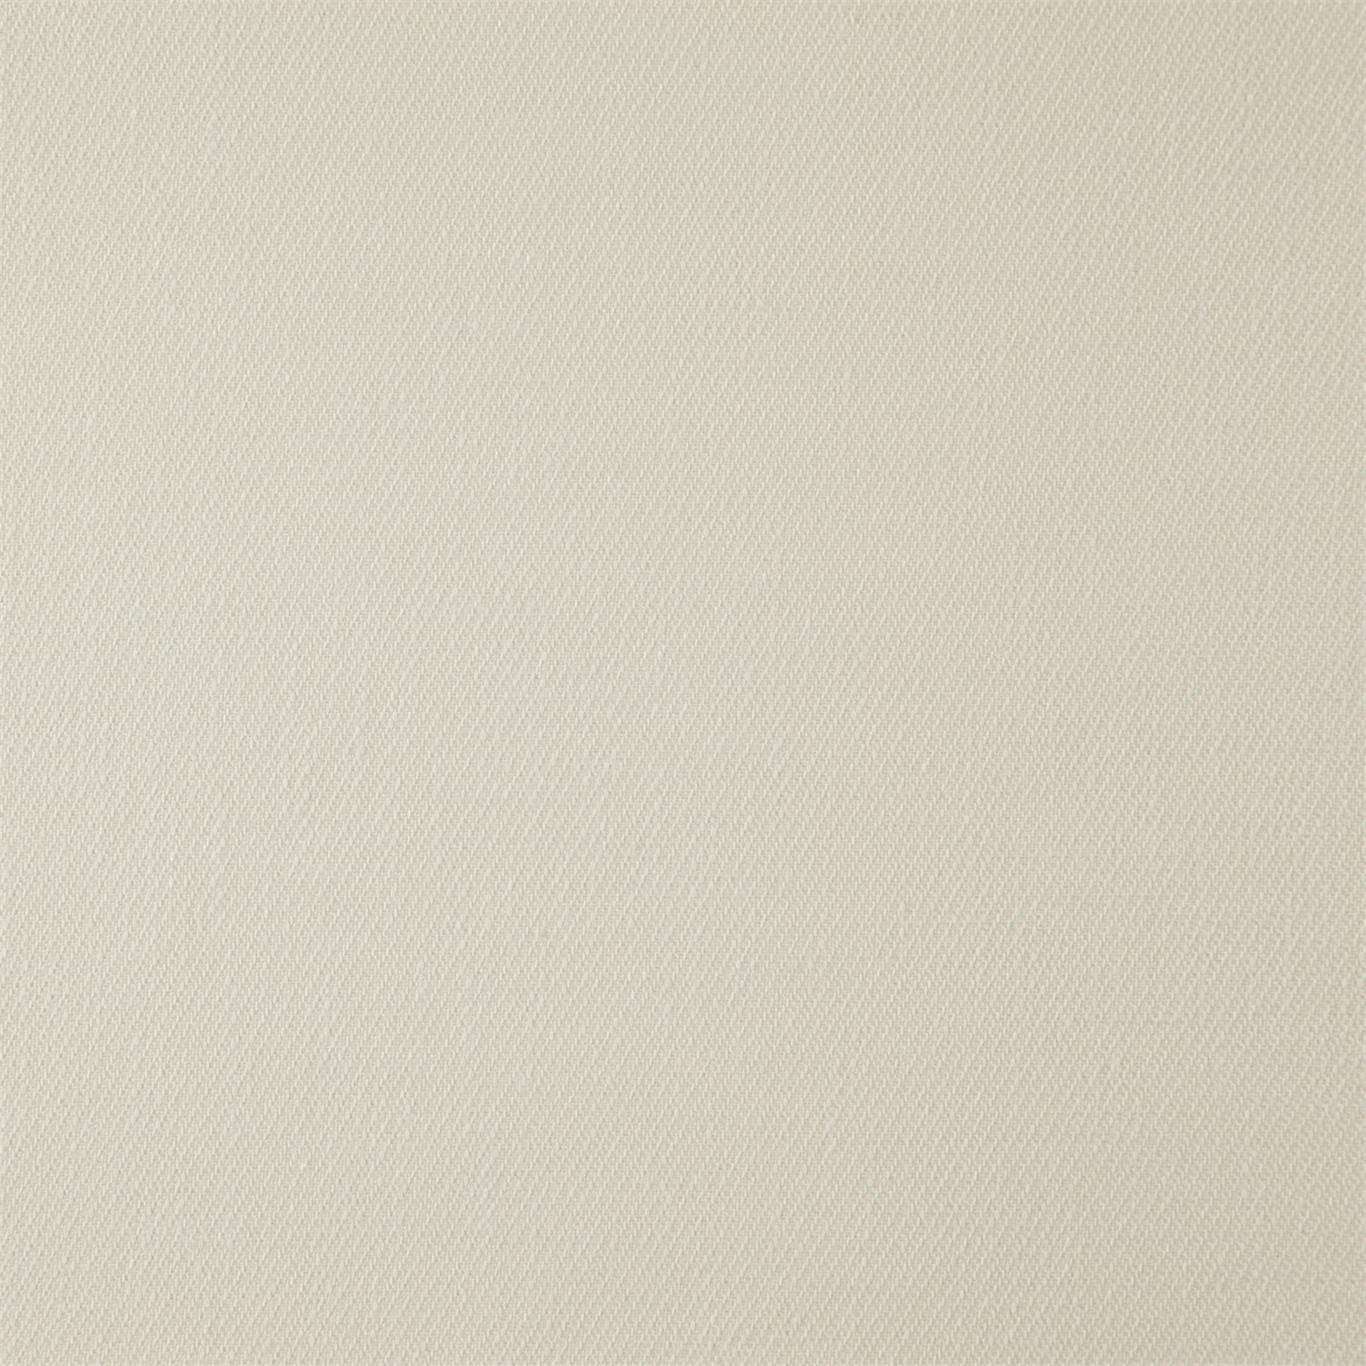 Chord Fabric by Harlequin - HSYM143099 - Ivory